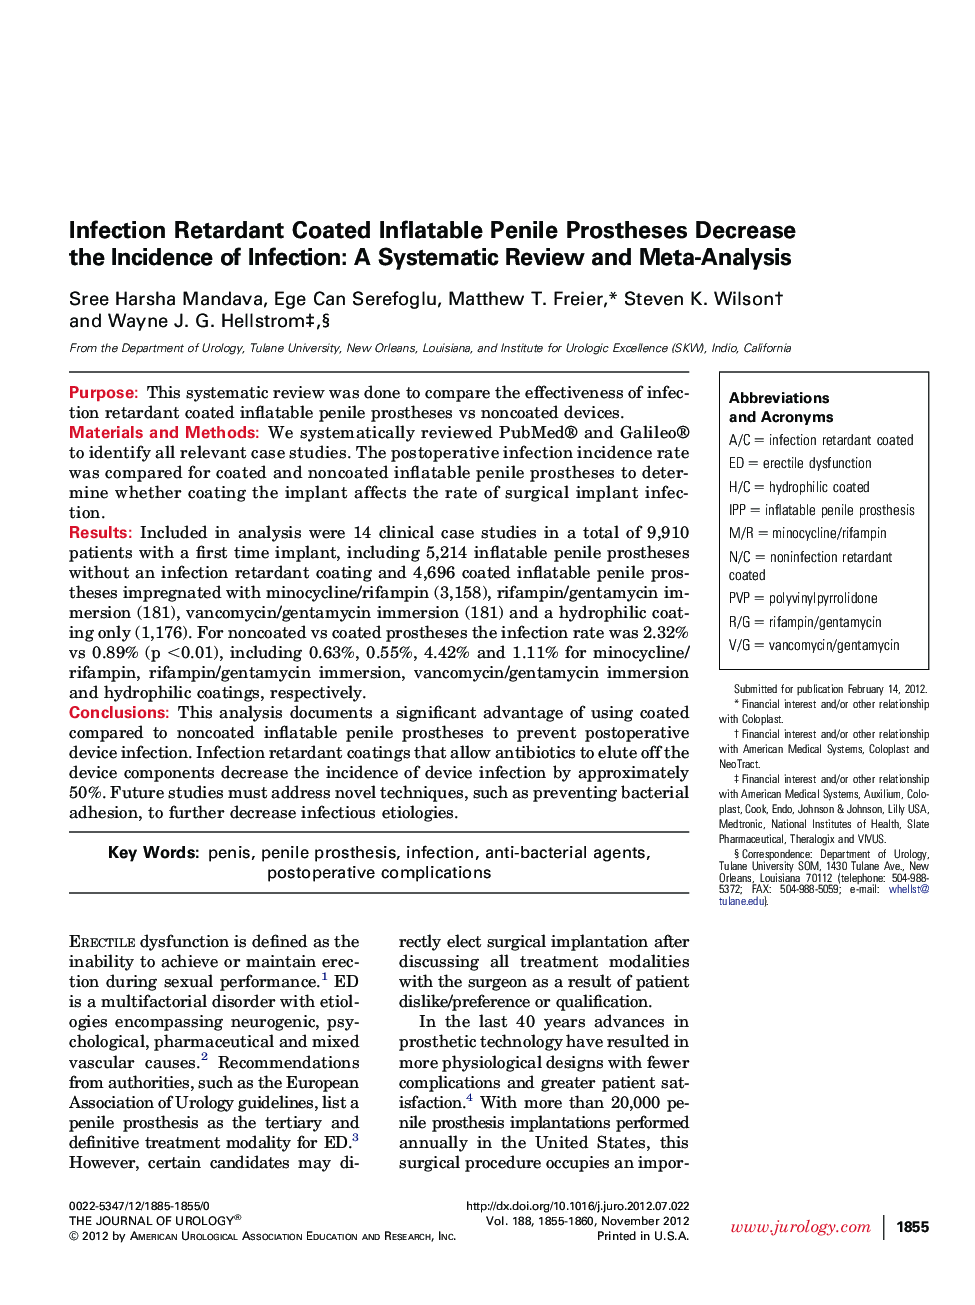 Infection Retardant Coated Inflatable Penile Prostheses Decrease the Incidence of Infection: A Systematic Review and Meta-Analysis